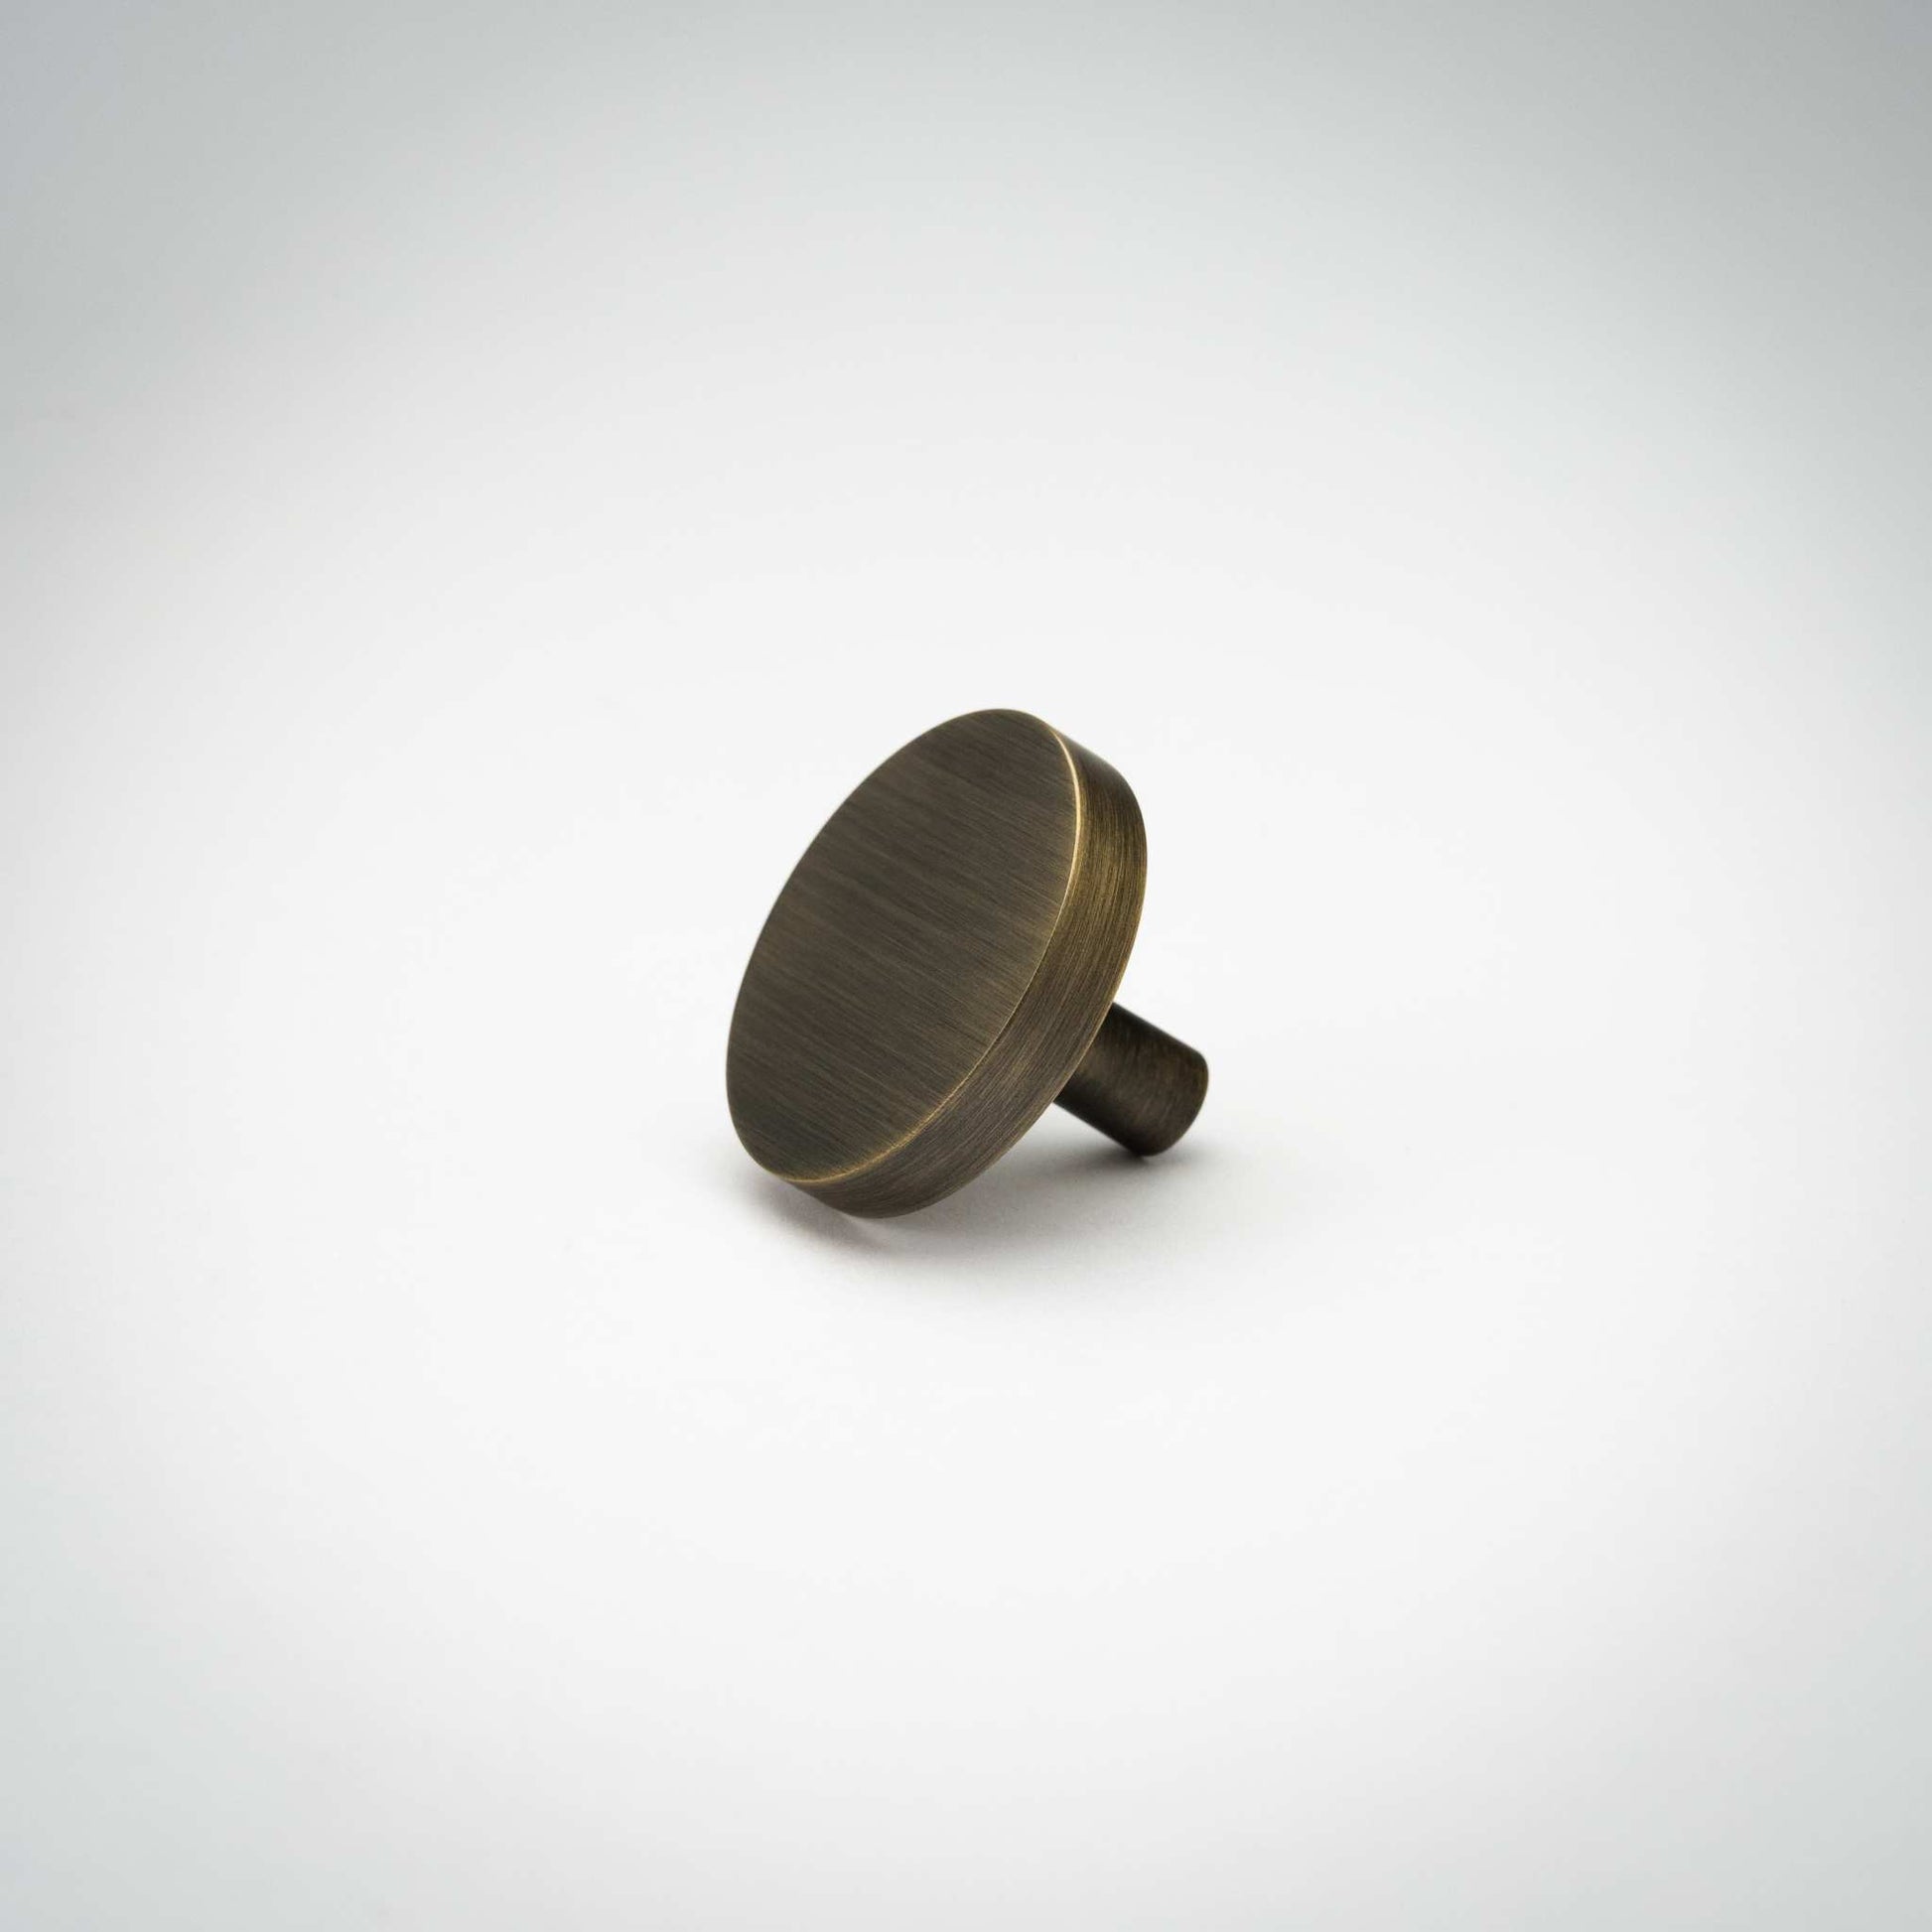 Rondelle, Solid Brass Cabinet Knobs


Our Rondelle Knob adds a touch of elegant simplicity to any contemporary or transitional space. The solid brass construction has an incredible weight in the hand,KnobRondelle, Solid Brass Cabinet Knobs